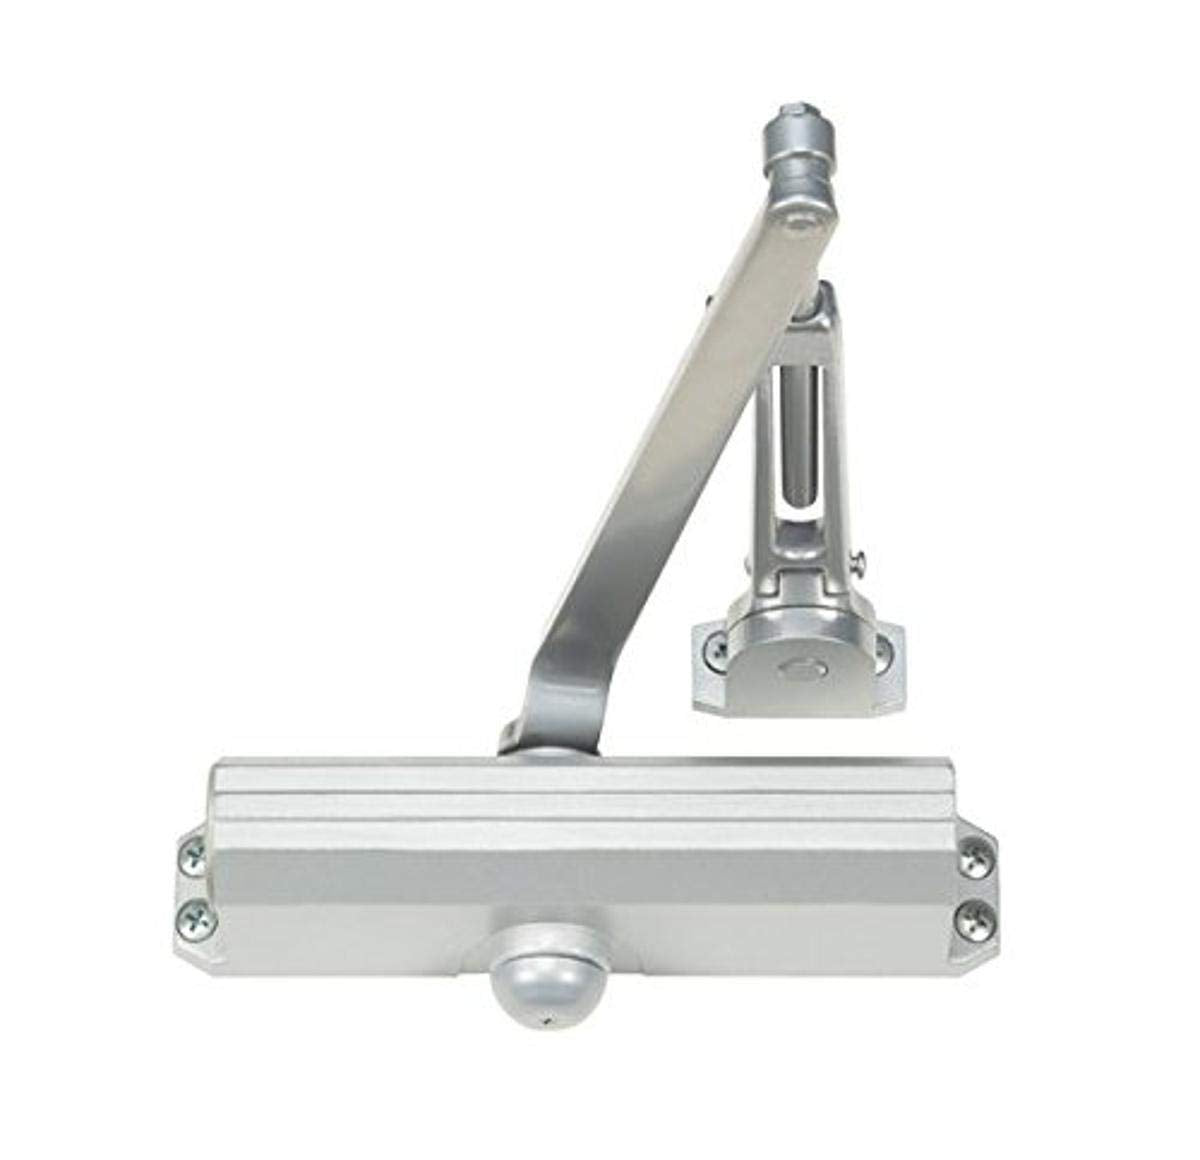 1601 689 – Grade 1 Tri Mount Surface Closer, Pull Side, Double Lever Arm Regular, 180 Deg. Swing, Adjustable Size 1-6, Aluminum Painted Finish, Non-Handed (List 262.00)